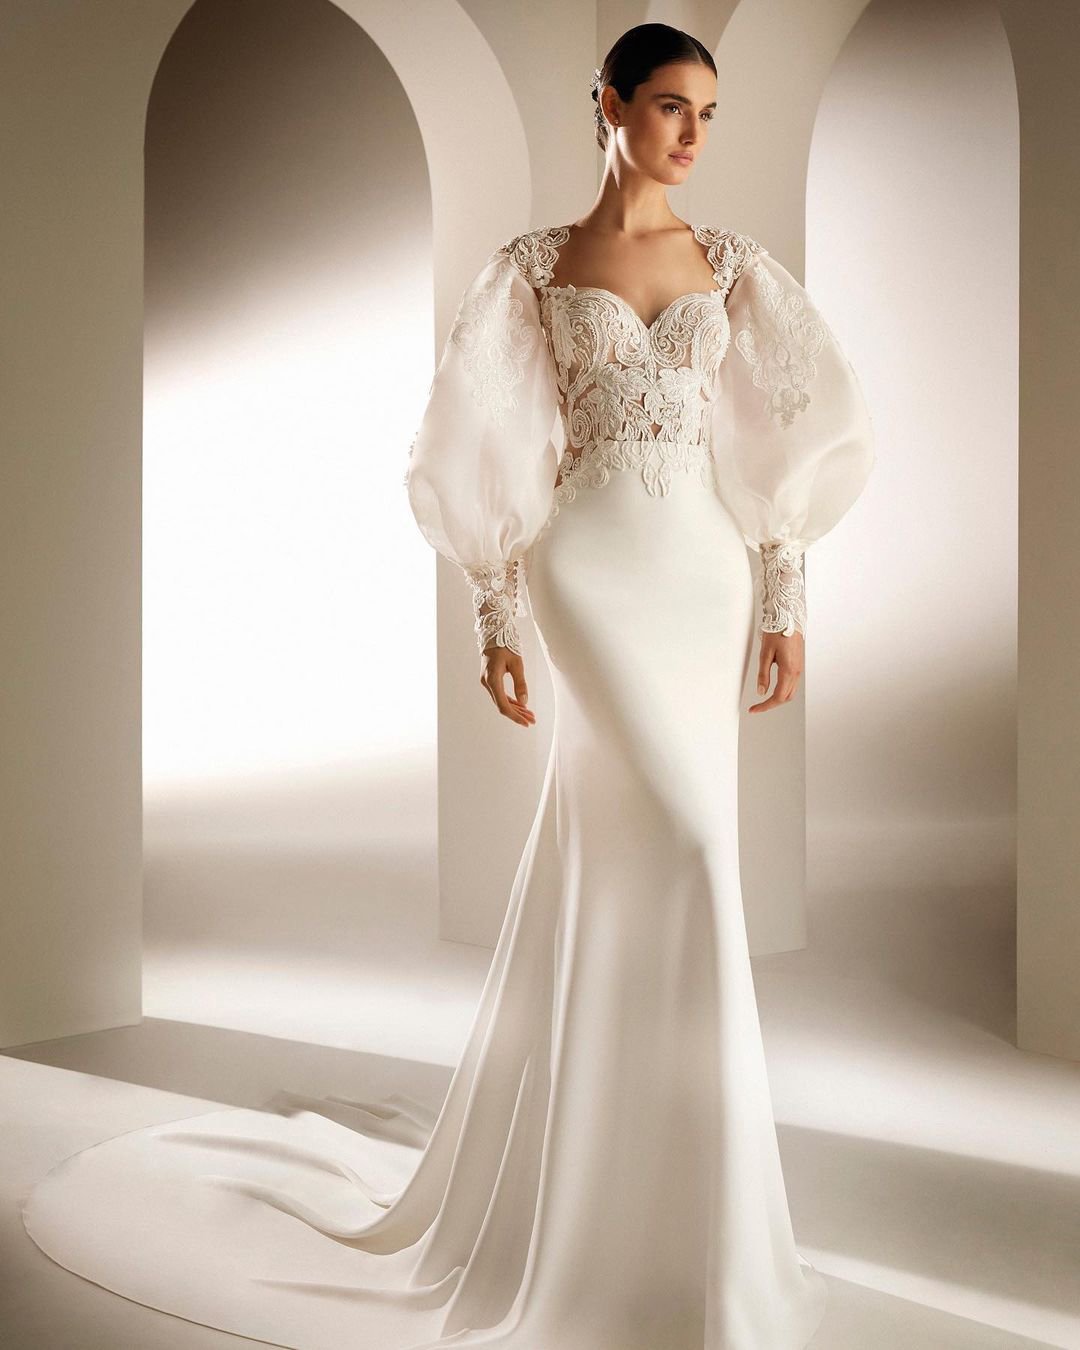 sweetheart neckline wedding dress fit and flare with long sleeves sexy pronovias